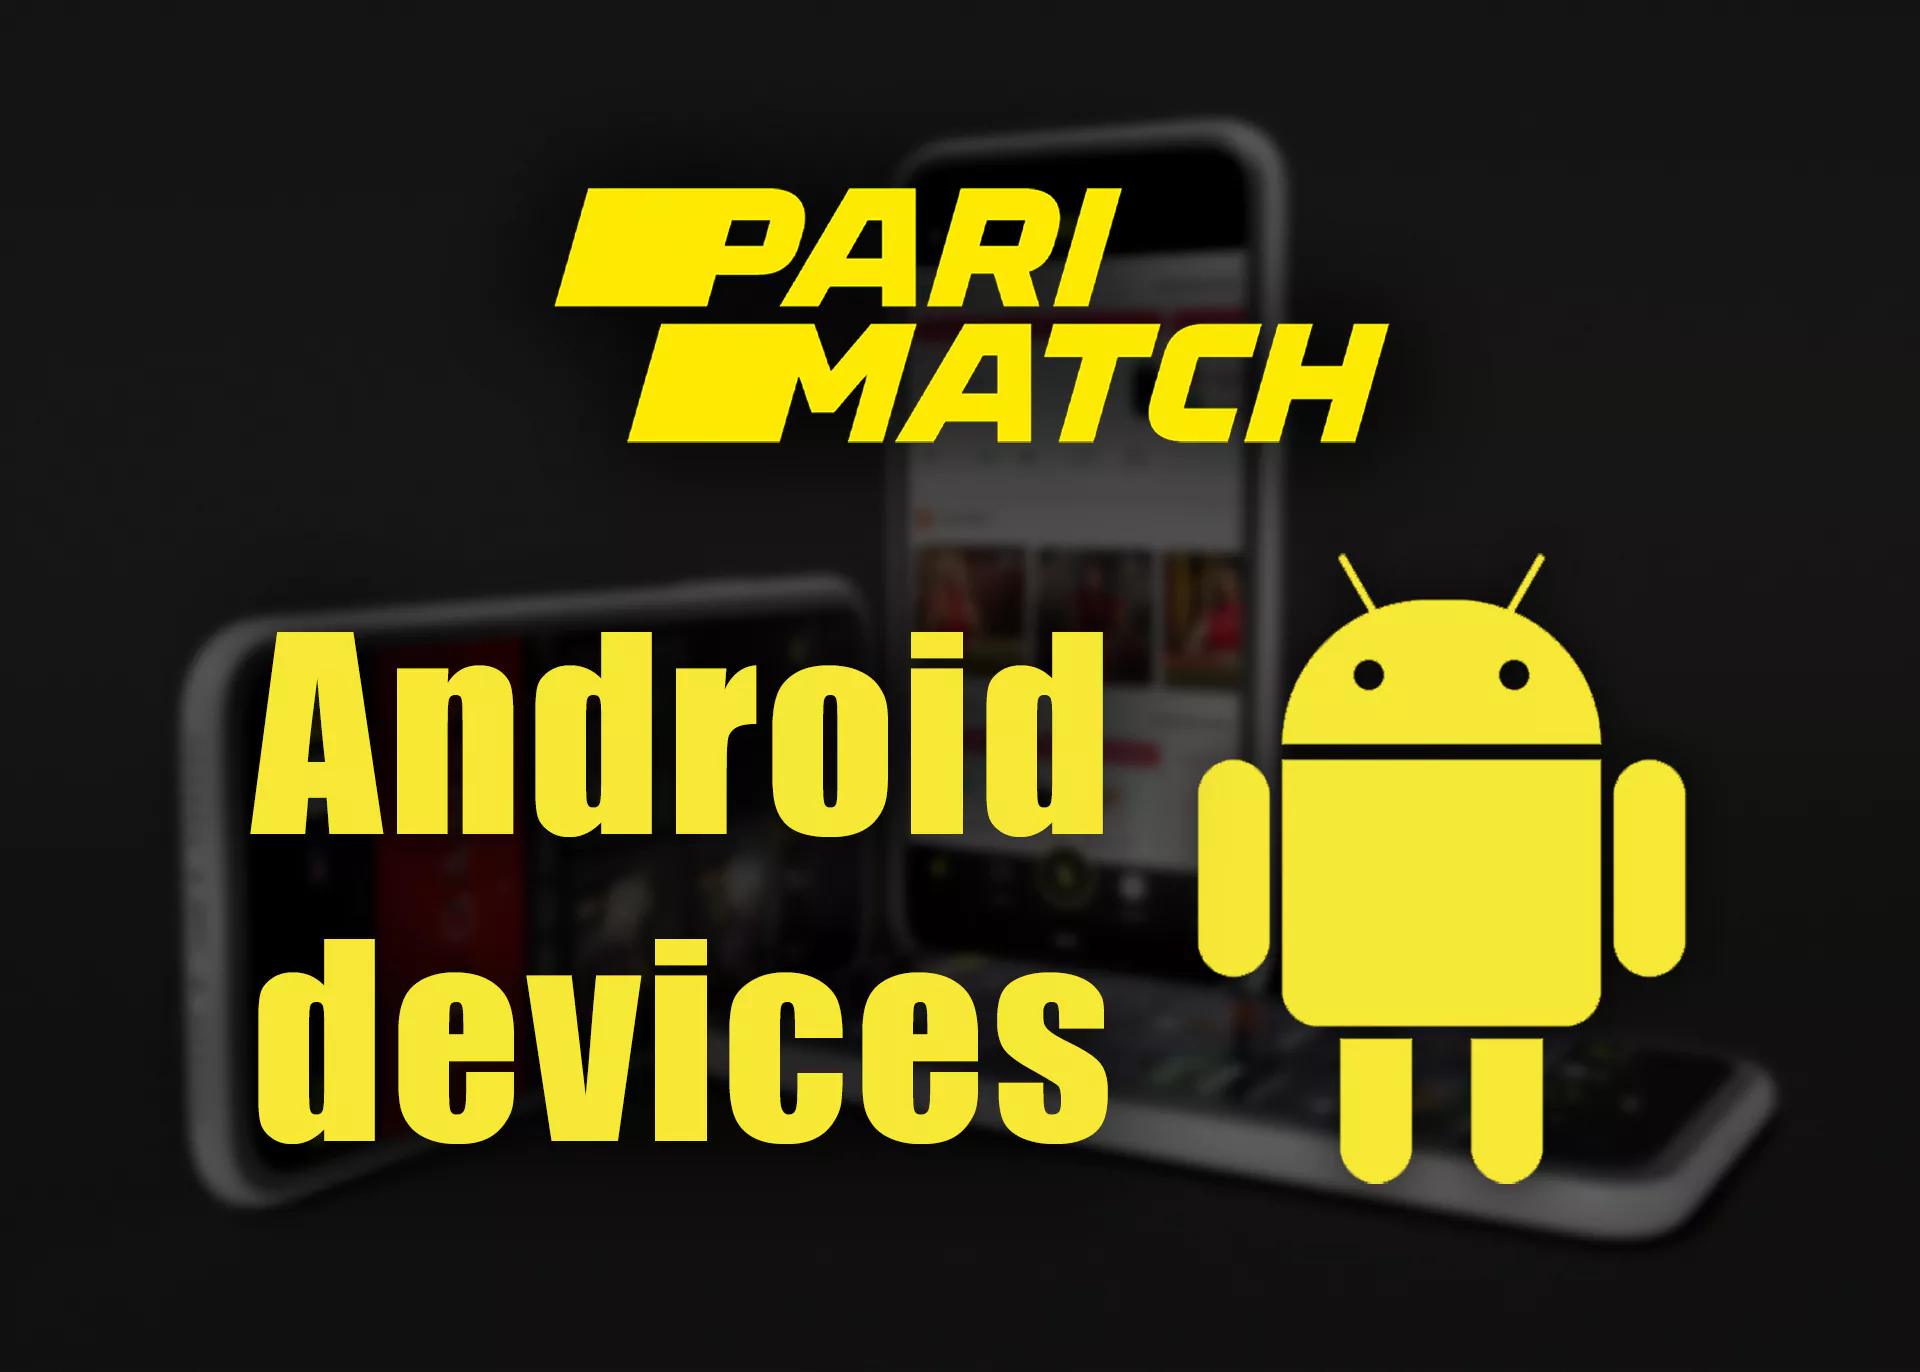 Here's just a sample list of devices on which you can easily install the Parimatch app for android.